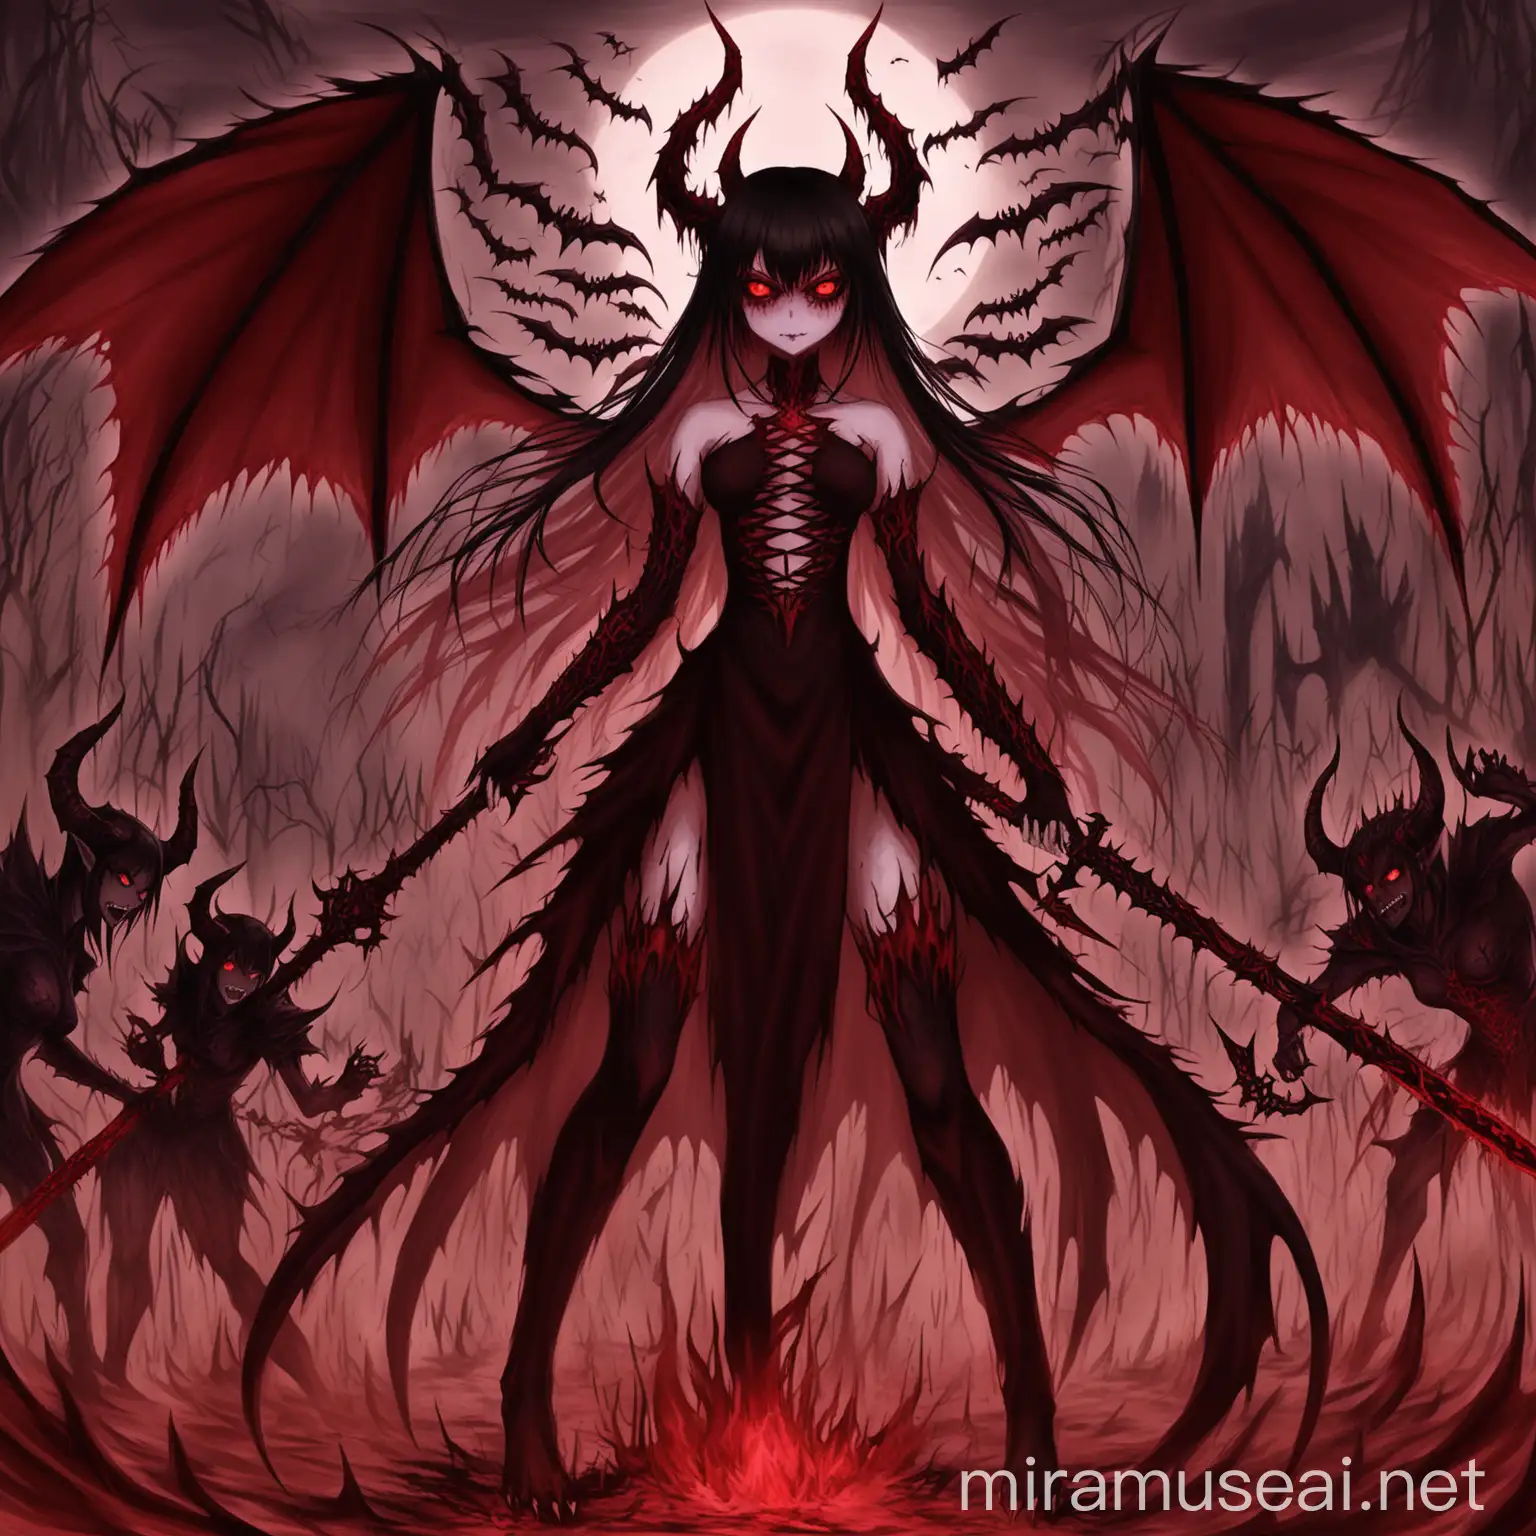 slayer of demons and has a demon sister